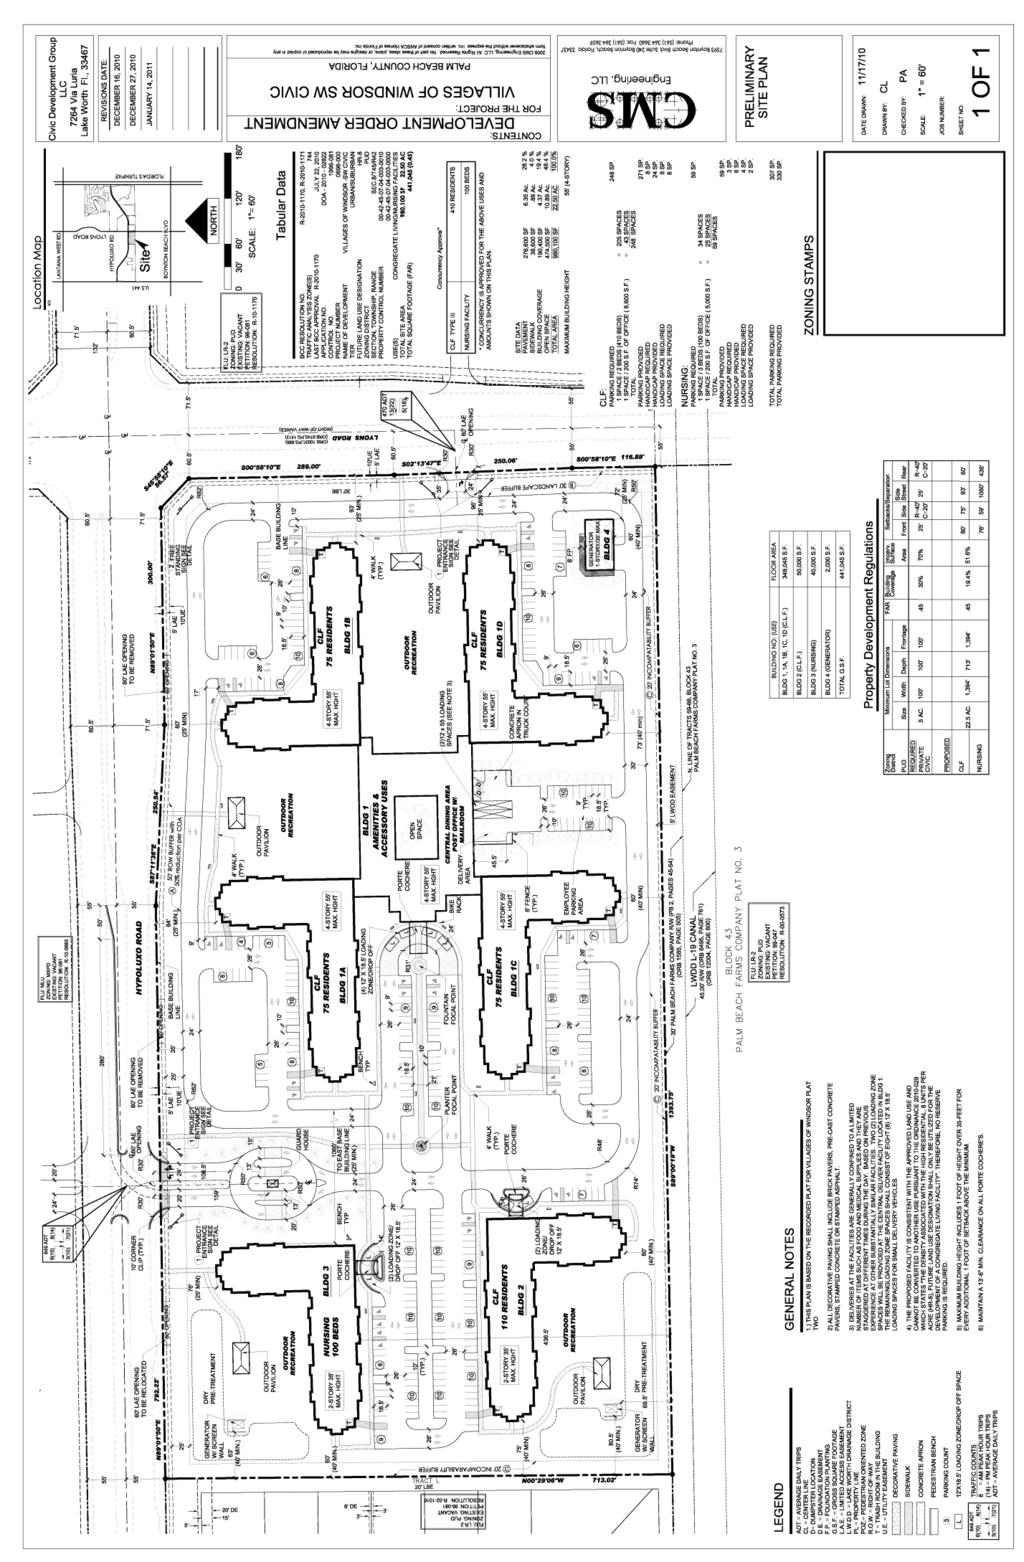 Figure 6 Preliminary Site Plan dated